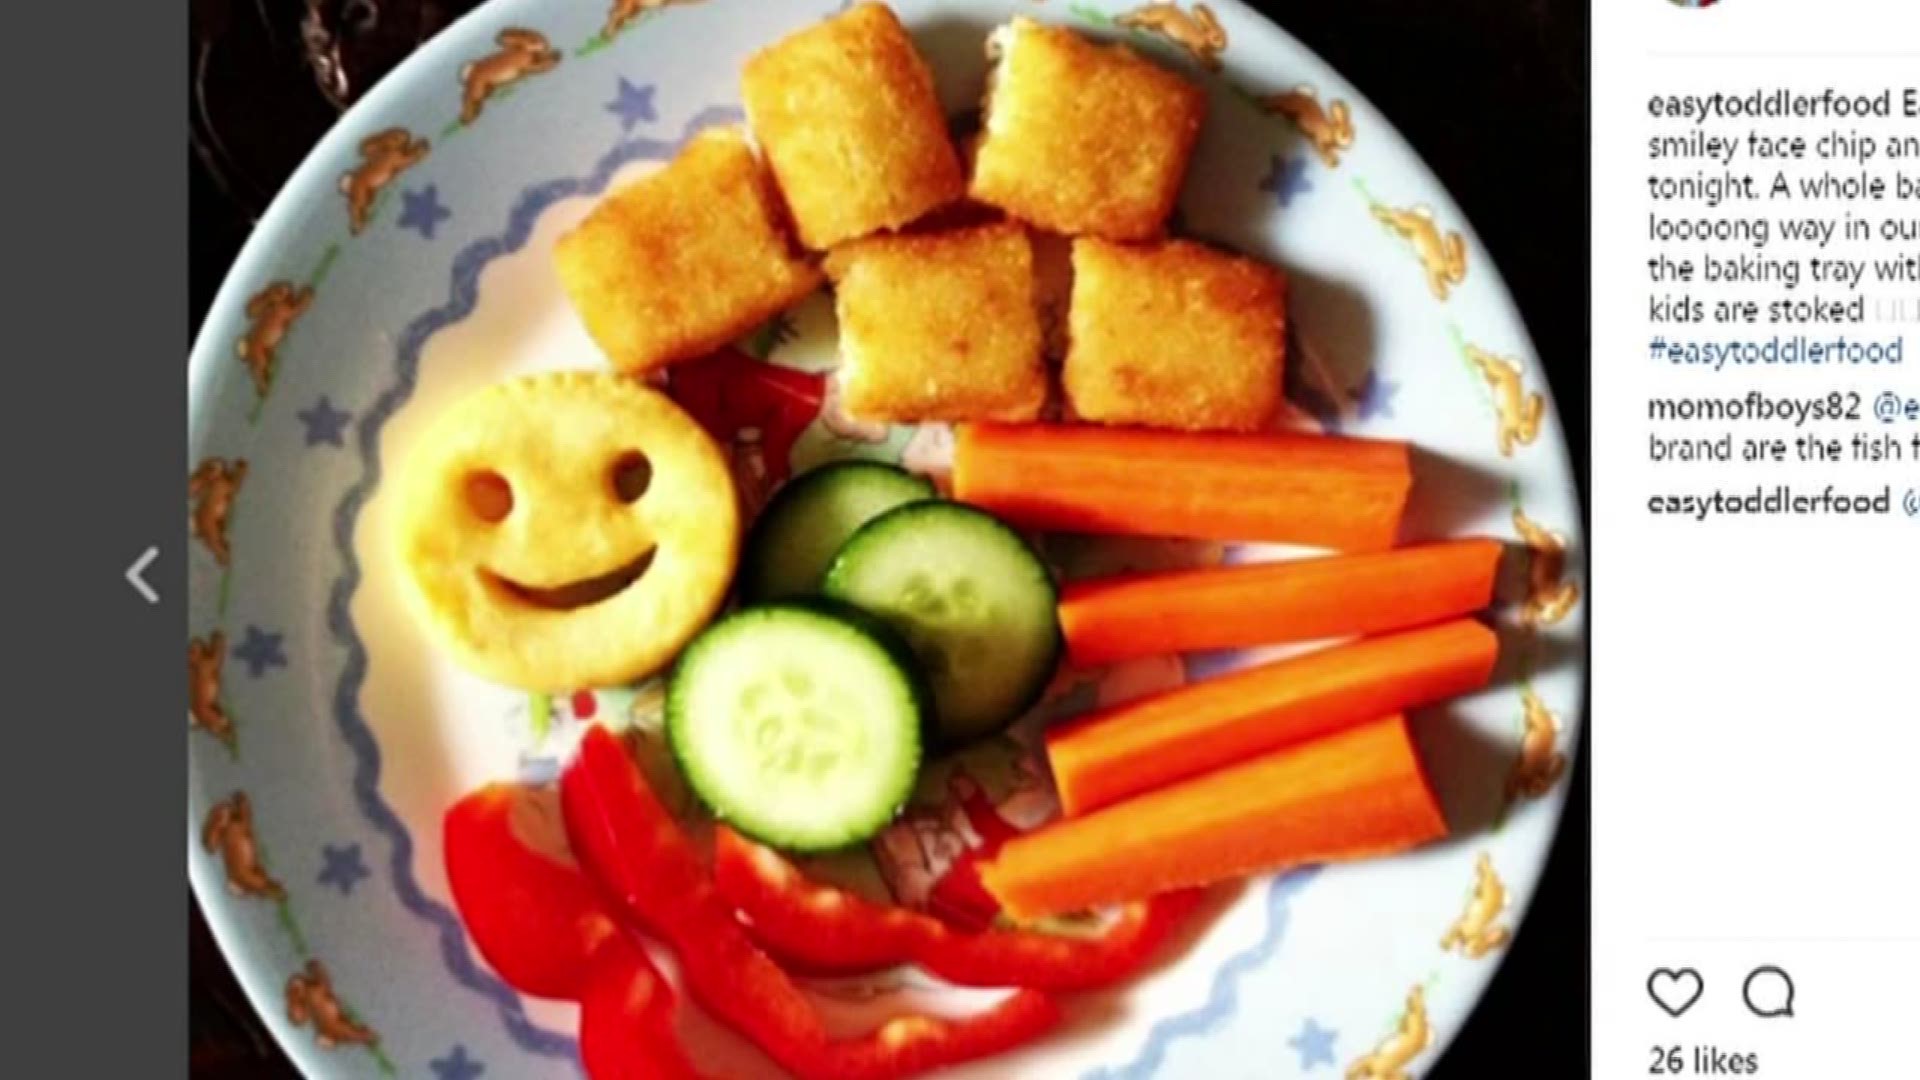 Spice up your kid's lunch with healthy options